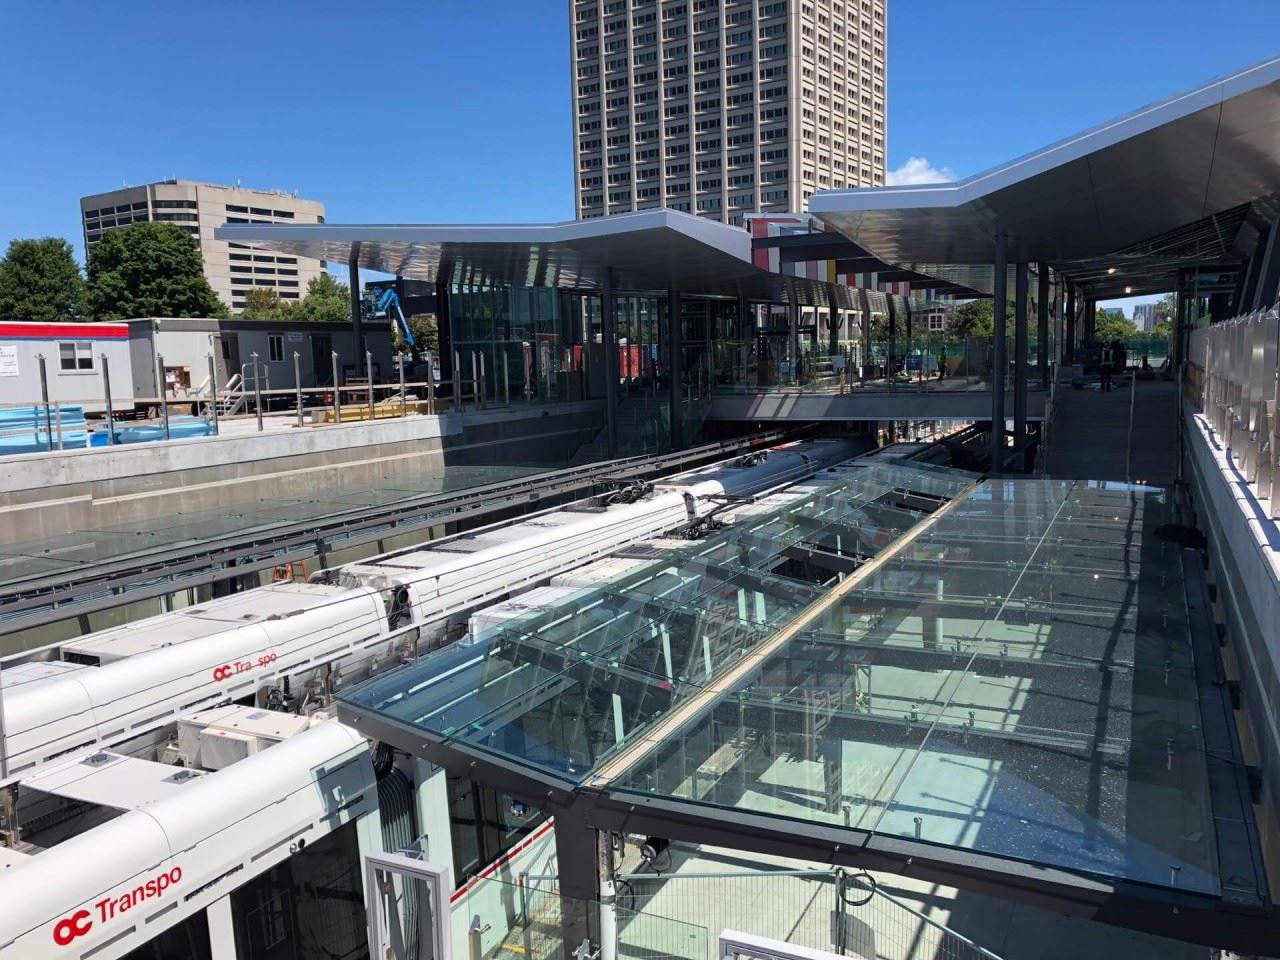 Snapshot of Tunney's Pasture Station - August 10, 2018